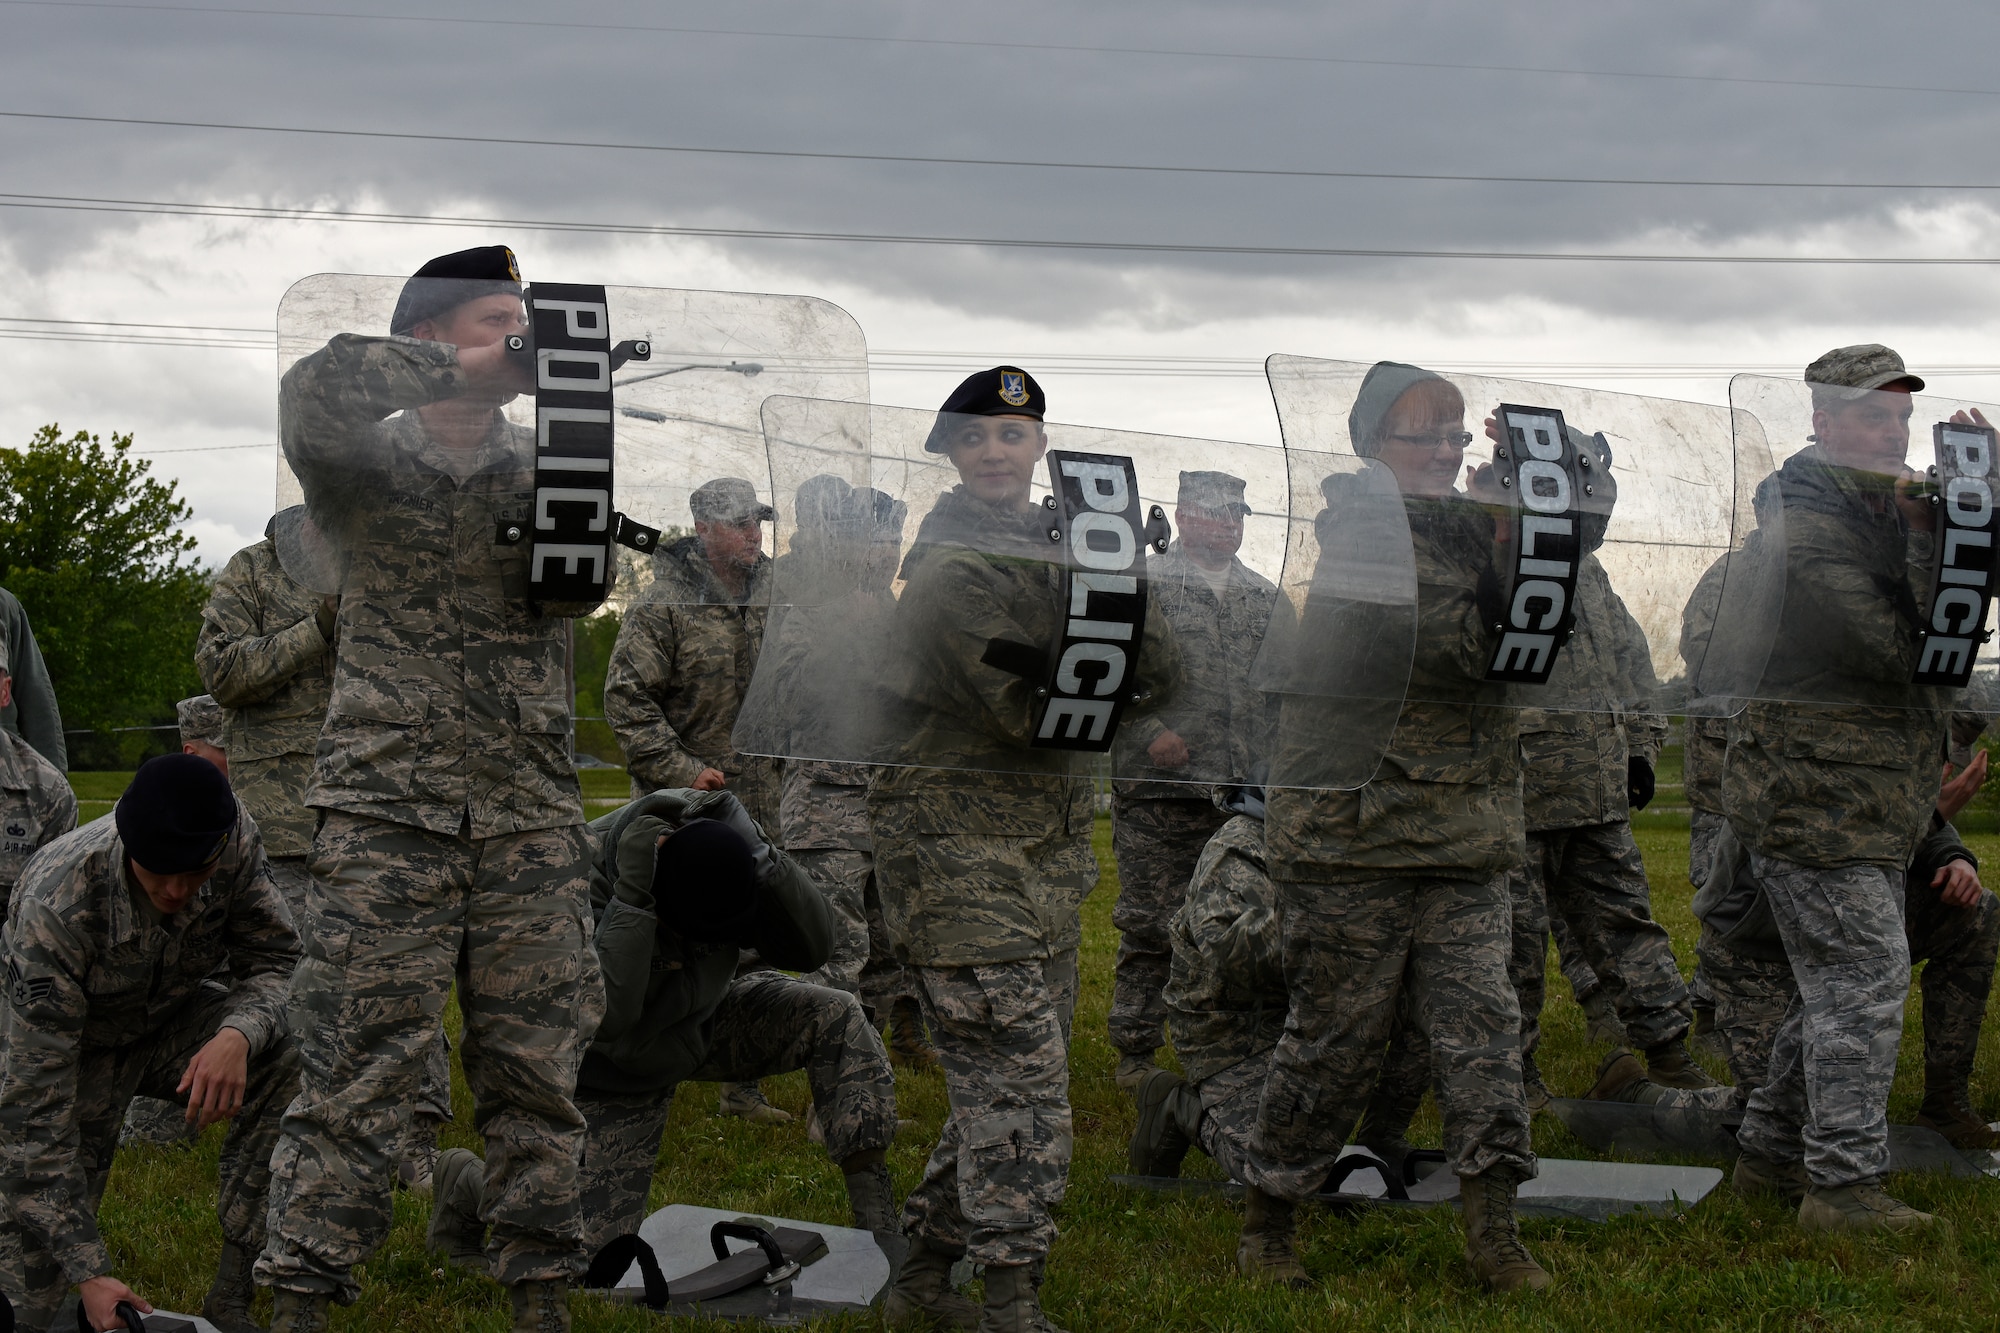 Airmen of the 121st Security Forces Squadron participated in domestic disorder response training on May 14, 2016, Rickenbacker Air National Guard Base, Ohio. The Columbus Division of Police facilitated the training and covered topics such as crowd control management and domestic response. (U.S. Air National Guard photo by Senior Airman Wendy Kuhn/Released)